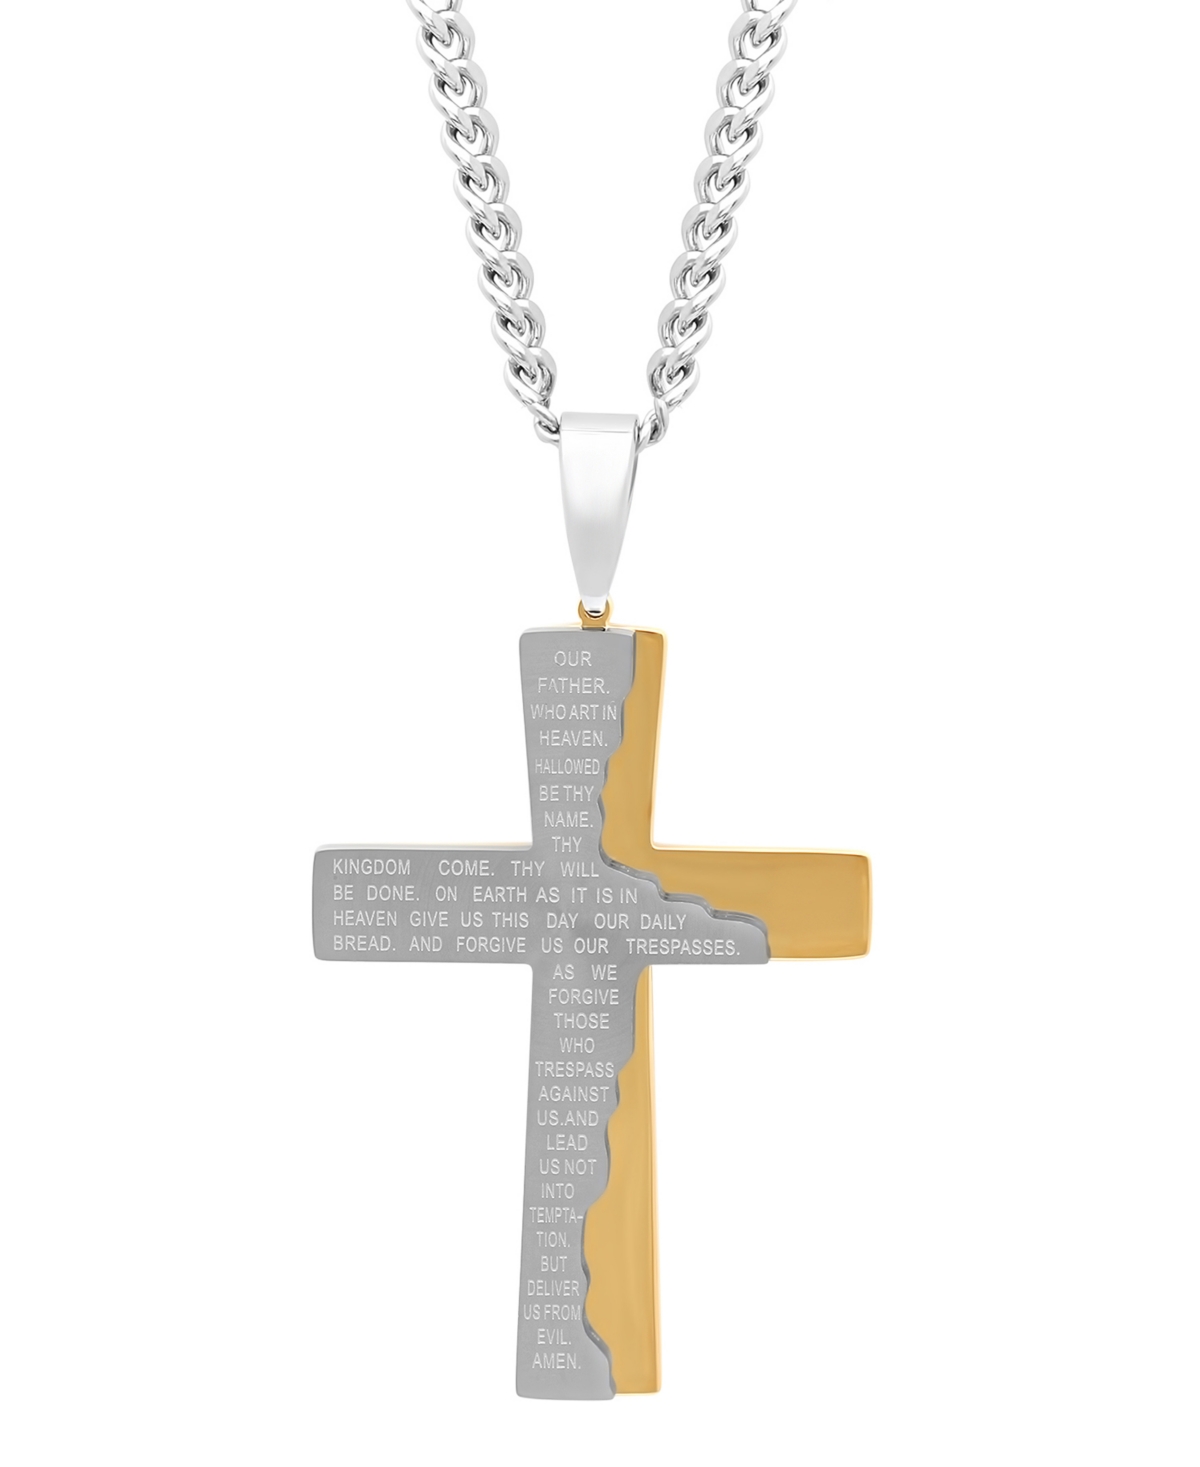 C & c Jewelry Macy's Men's The Lord's Prayer Tablet Cross Pendant Necklace in Two-Tone Stainless Steel